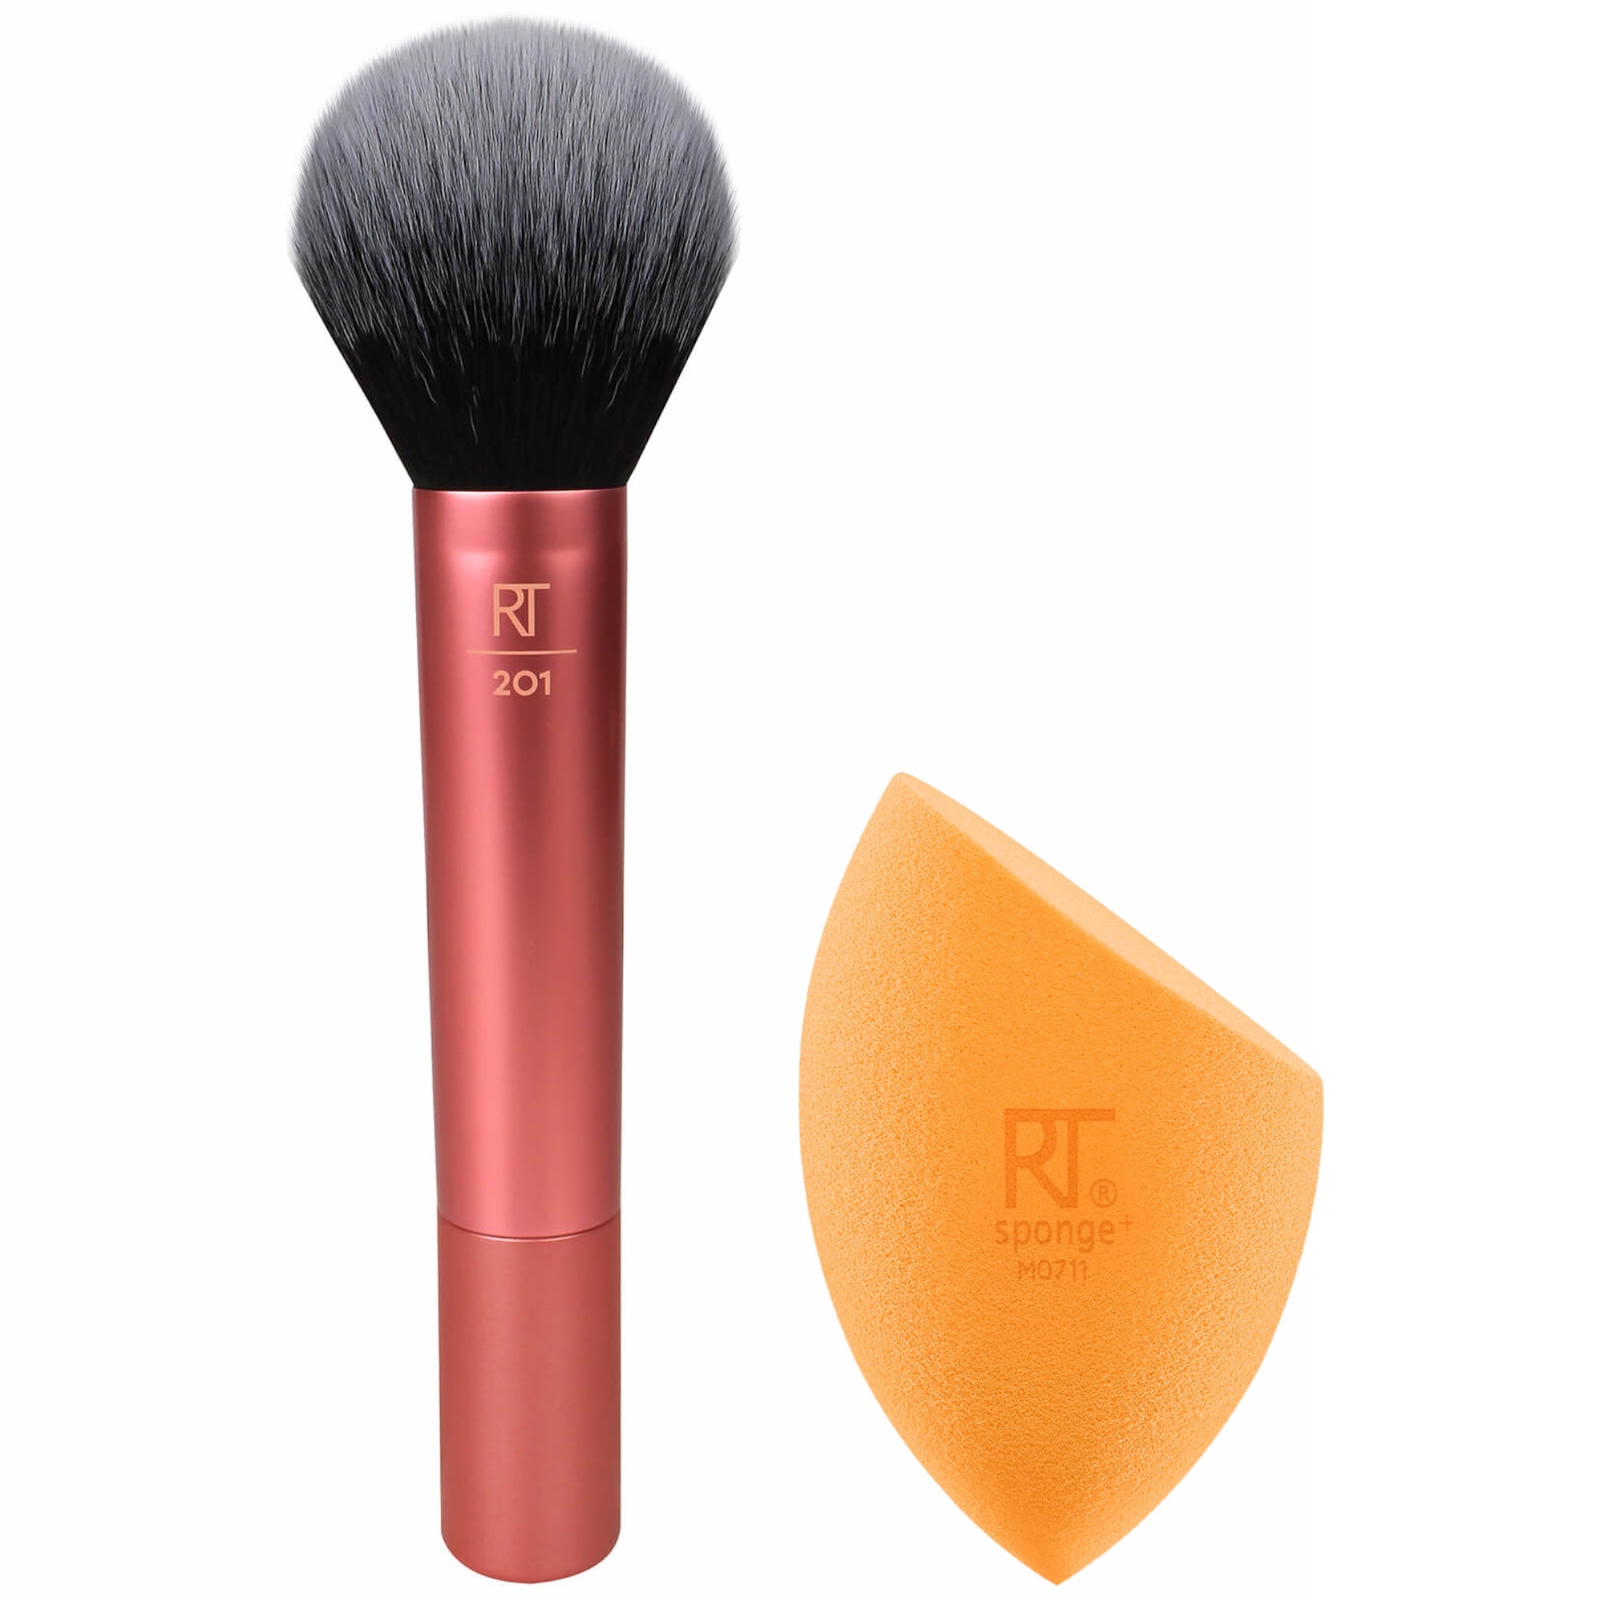 Image of Real Techniques Miracle Complexion Sponge and Powder Brush Duo